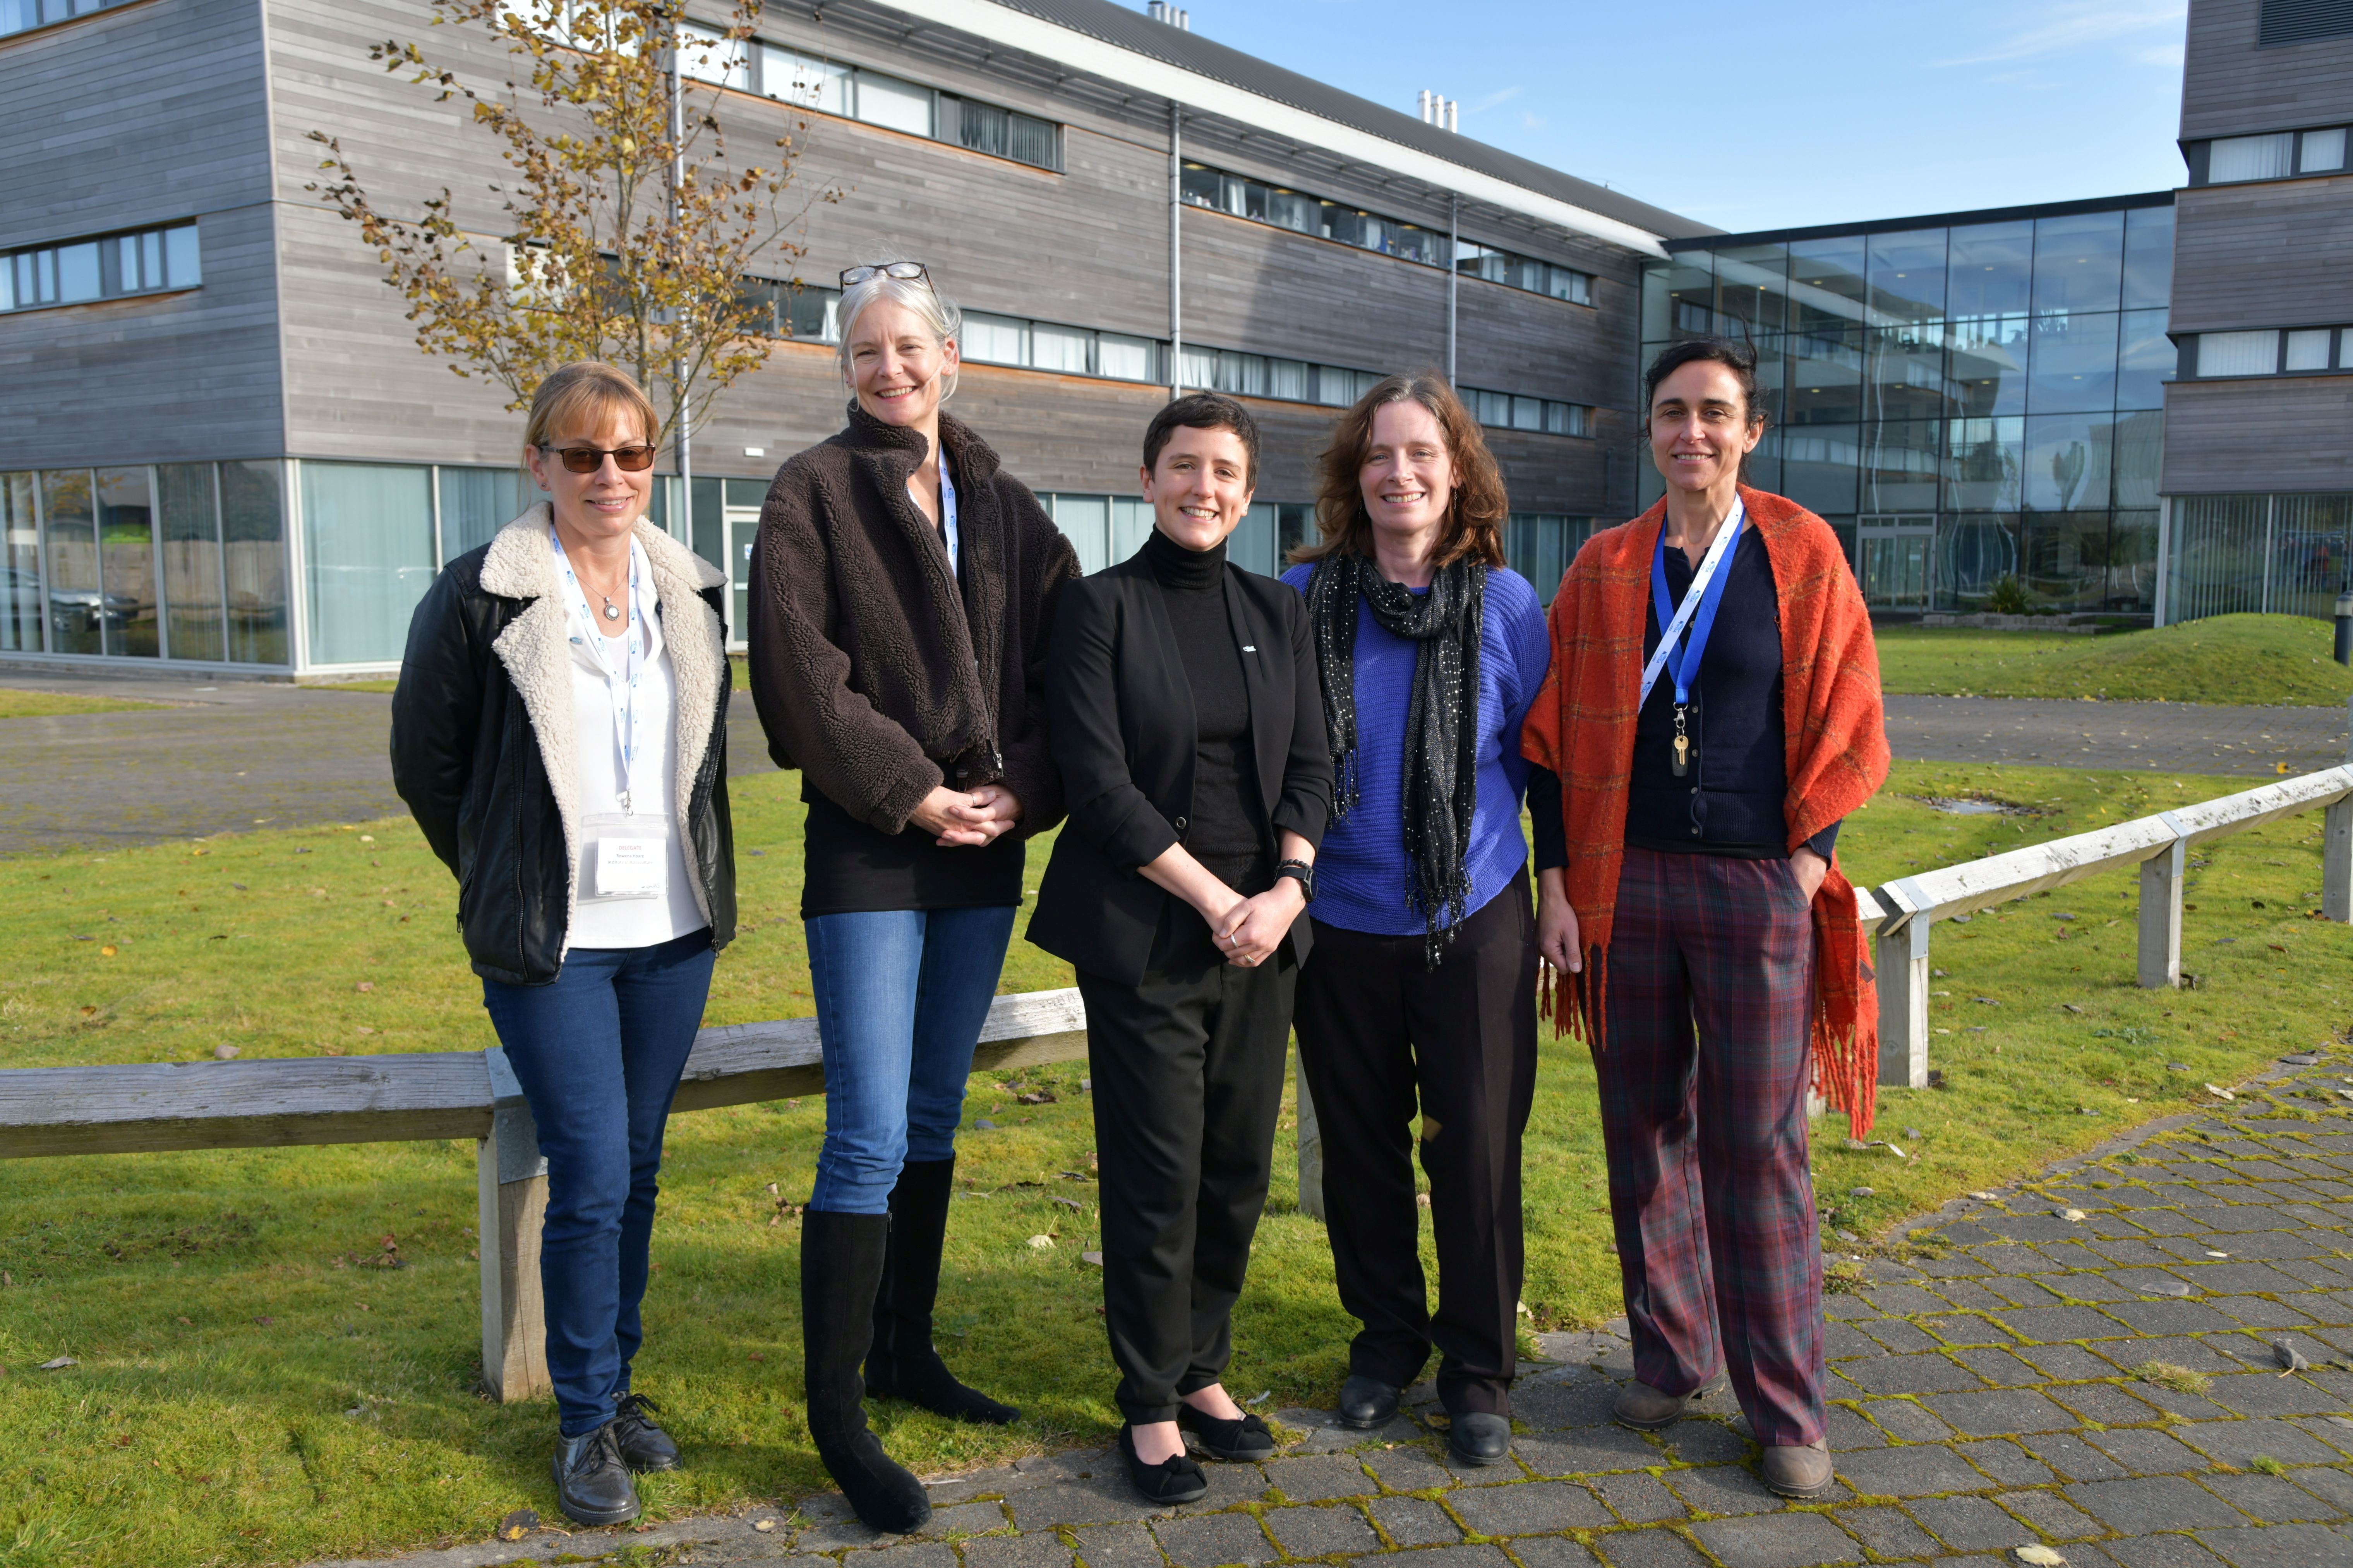 The minister (centre) at SAMS with (from left to right) Rowena Hoare and Sophie Fridman of the Institute of Aquaculture, Mary Fraser of SAIC, and Teresa Garzon of Patogen